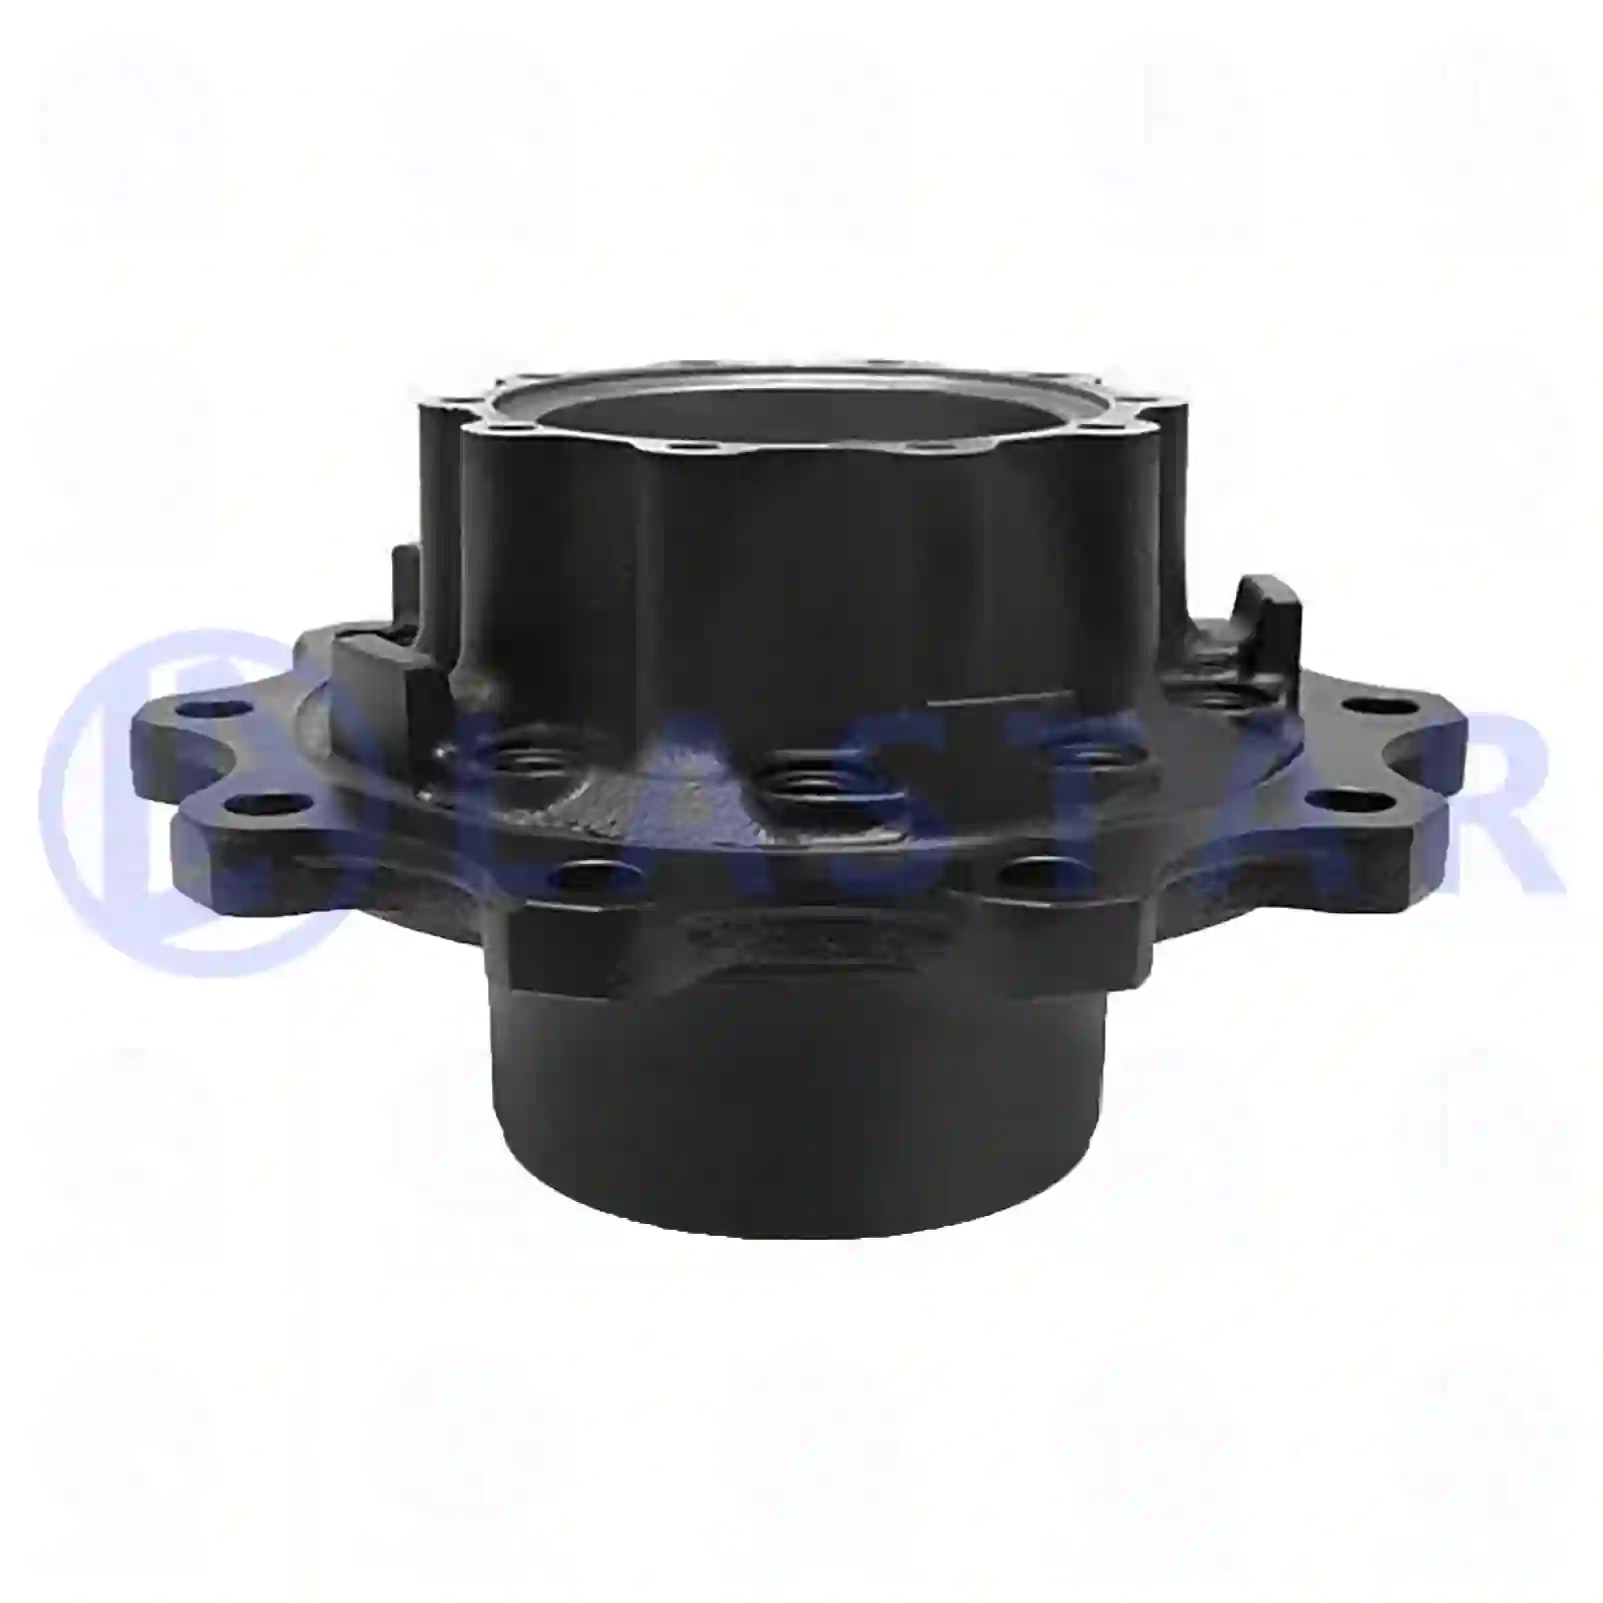 Wheel hub, without bearings, 77726954, 1724790, , , , , ||  77726954 Lastar Spare Part | Truck Spare Parts, Auotomotive Spare Parts Wheel hub, without bearings, 77726954, 1724790, , , , , ||  77726954 Lastar Spare Part | Truck Spare Parts, Auotomotive Spare Parts